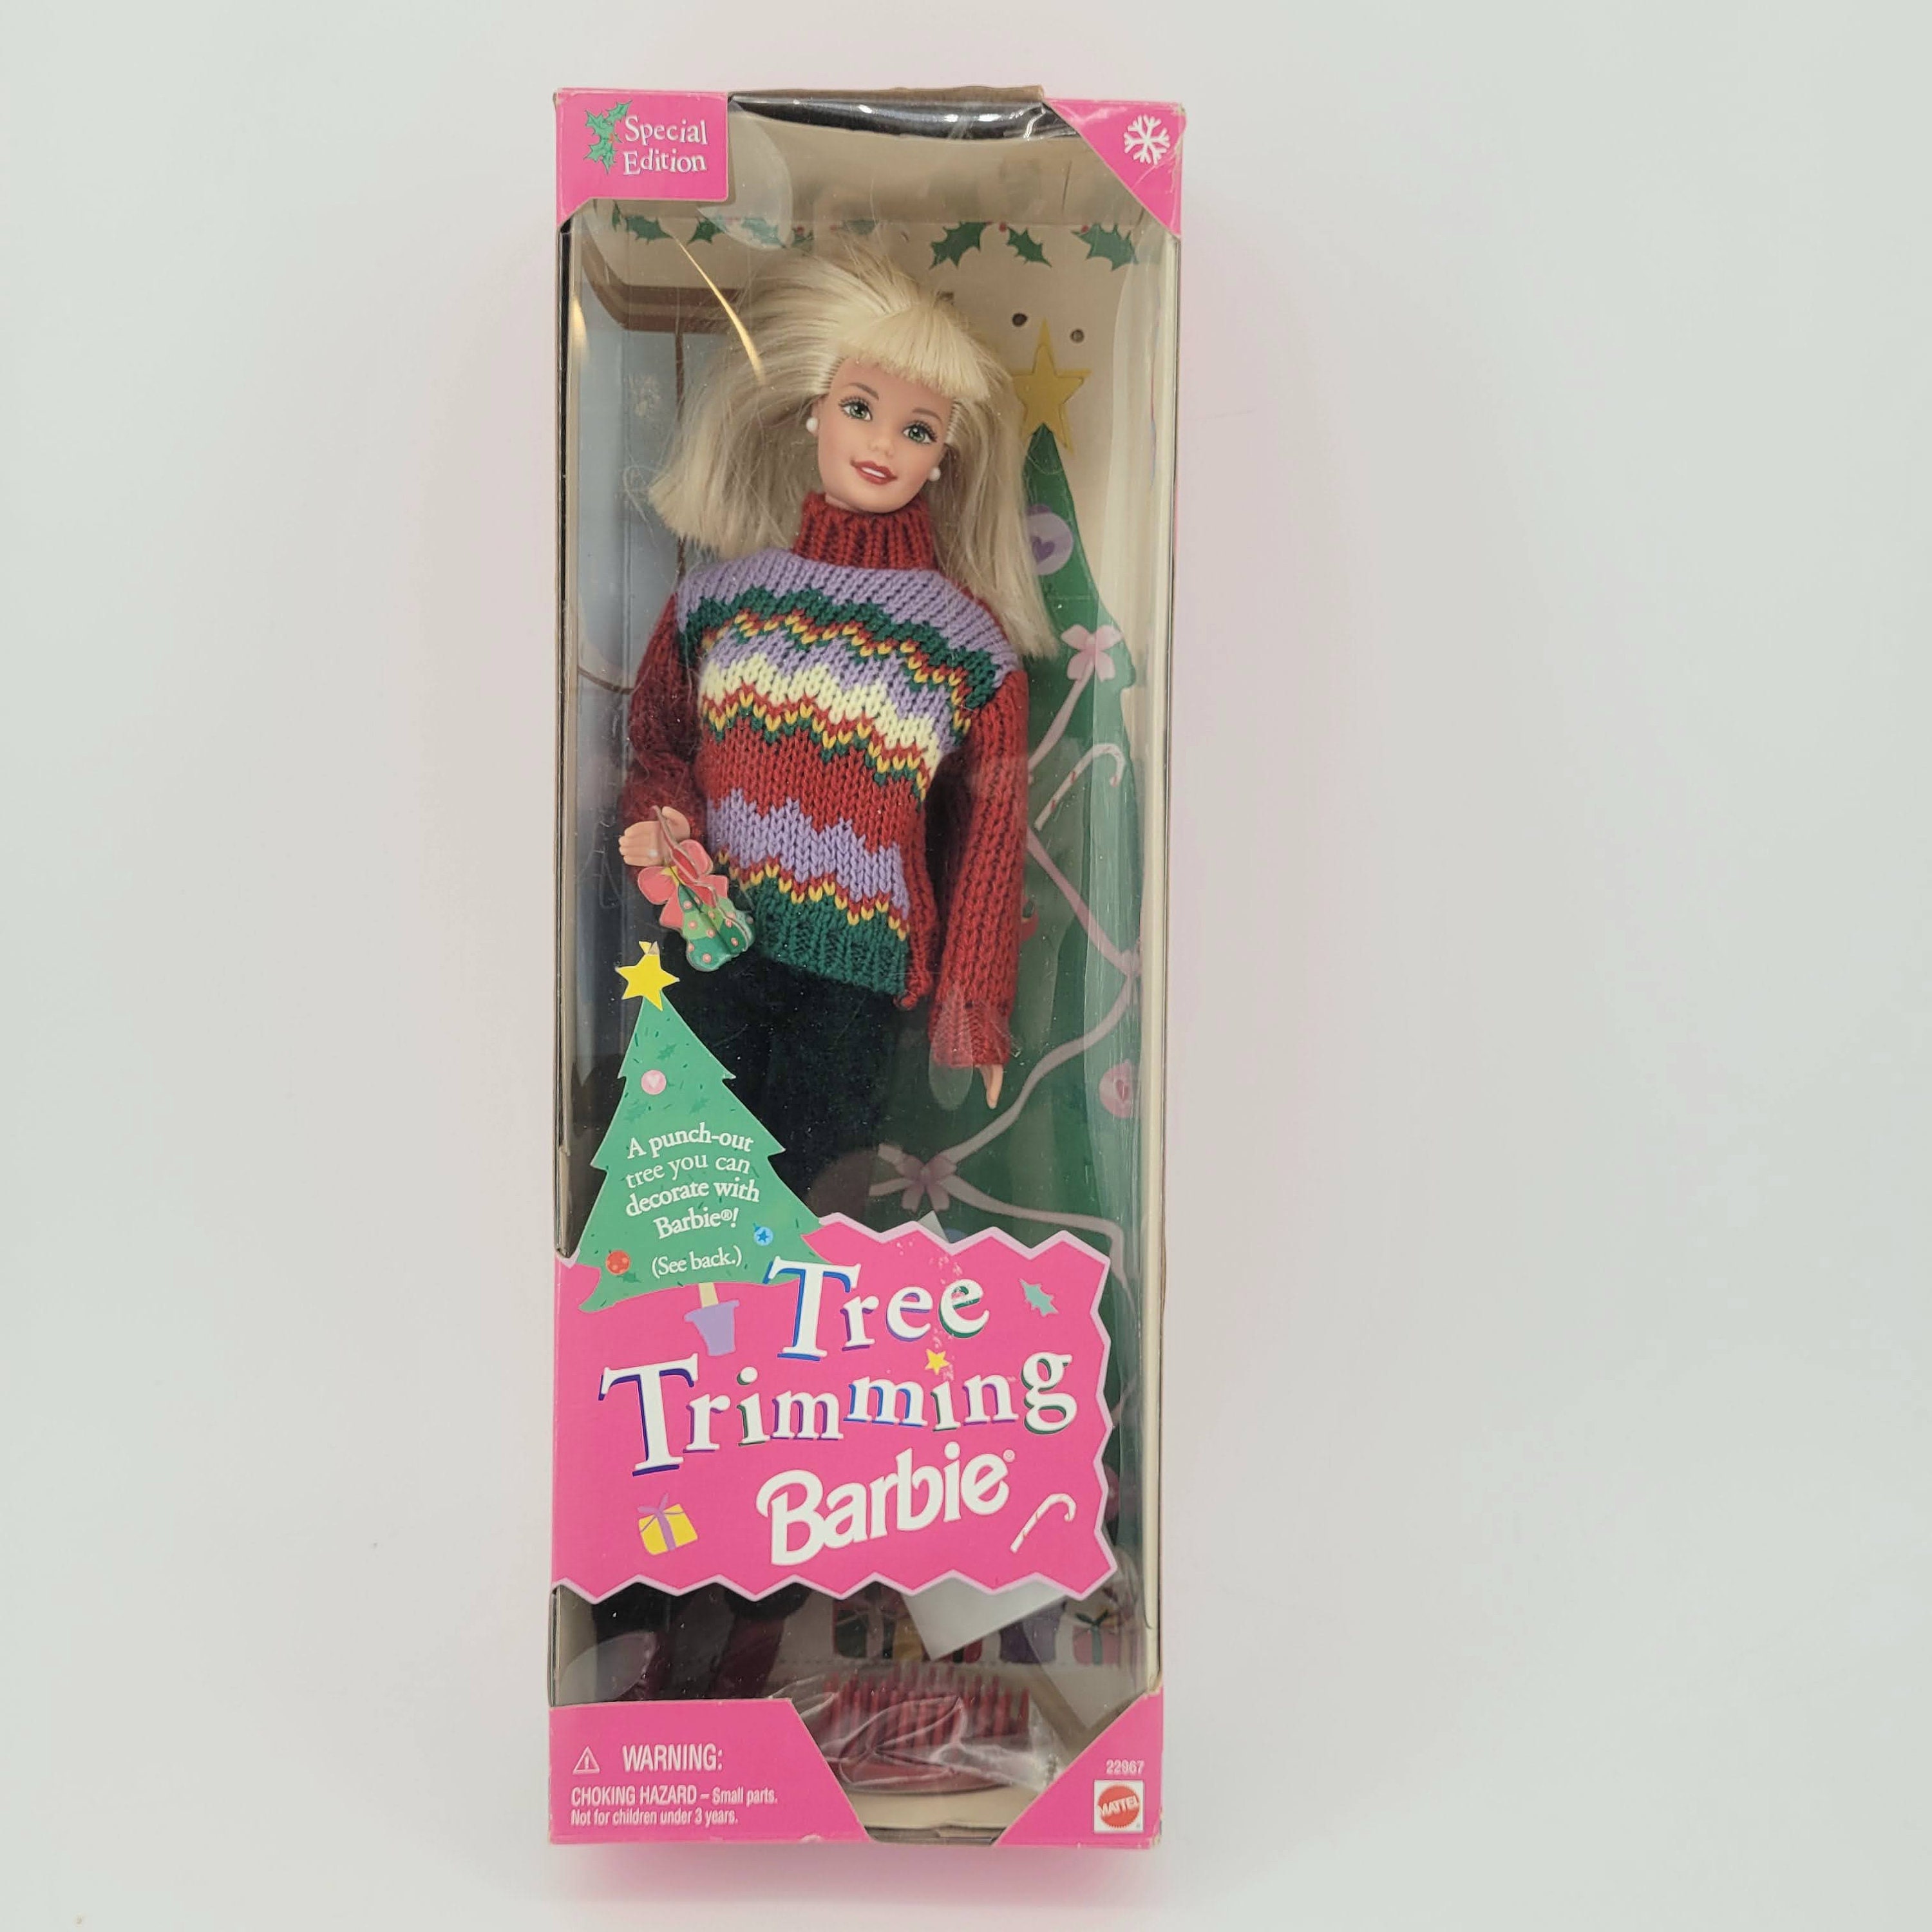 X Christmas Tree Trimming Barbie Doll Holiday Special Edition (1998)